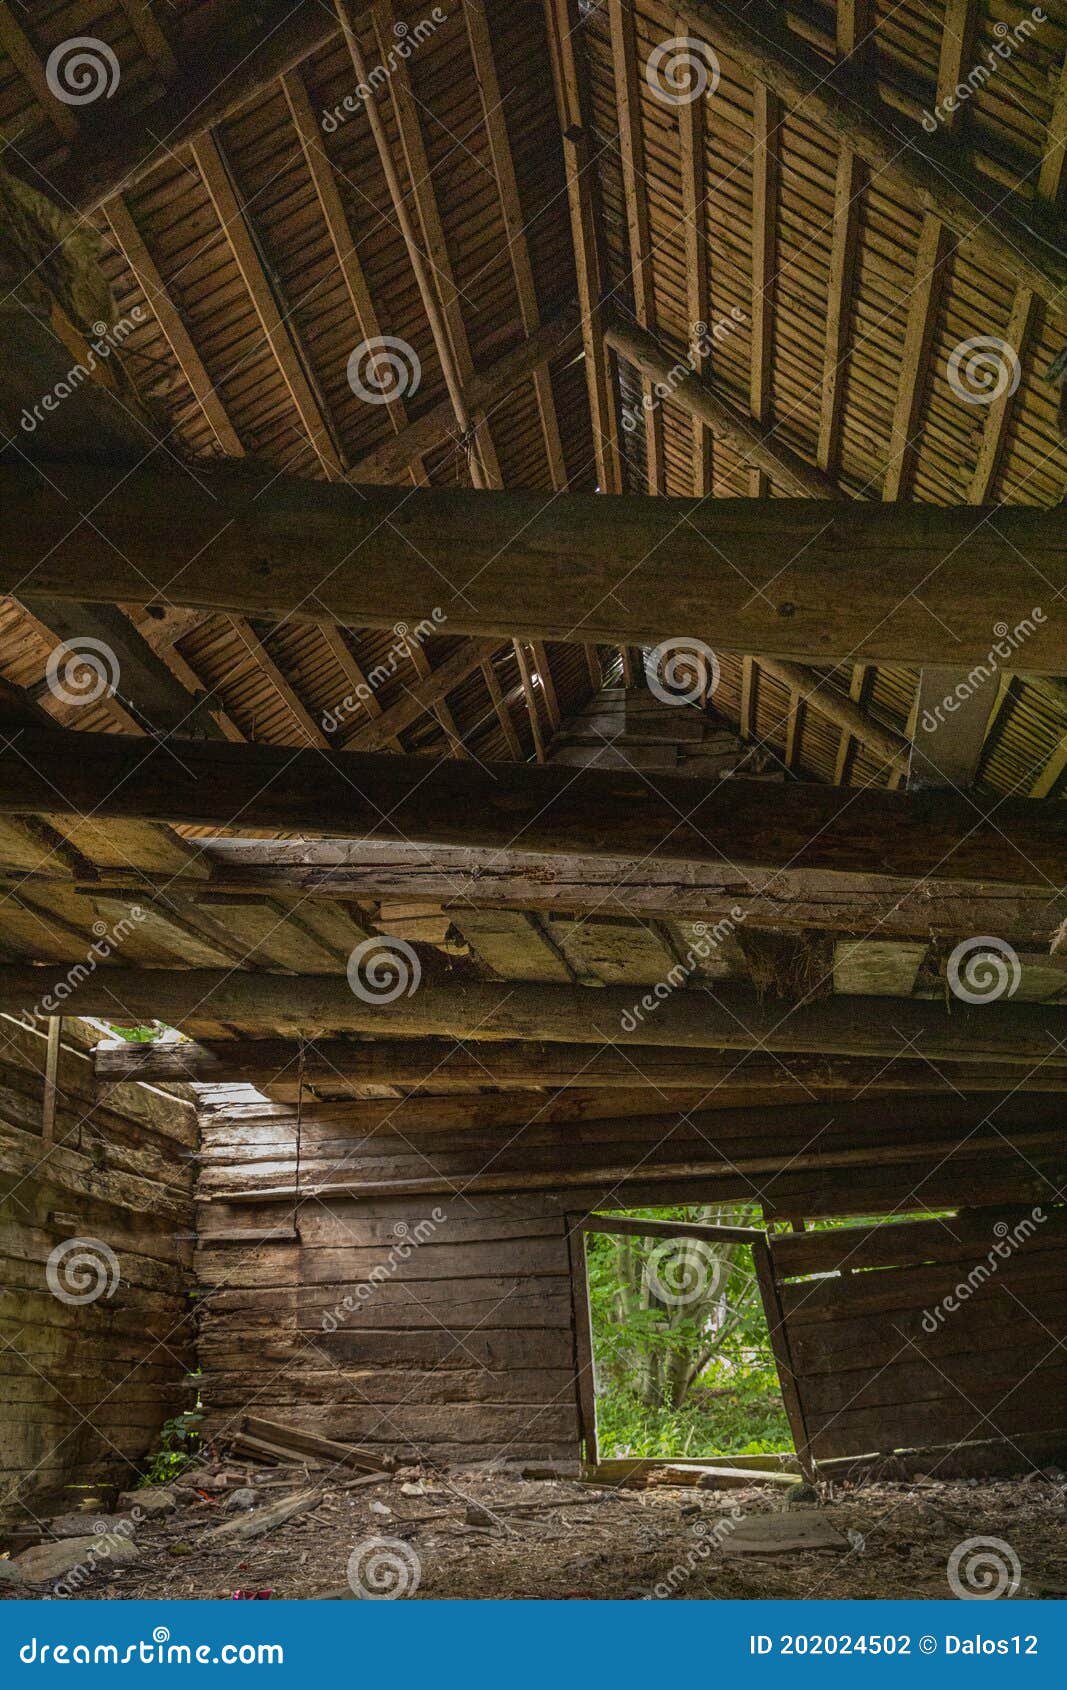 wooden old barn roof from inside. texture  background.